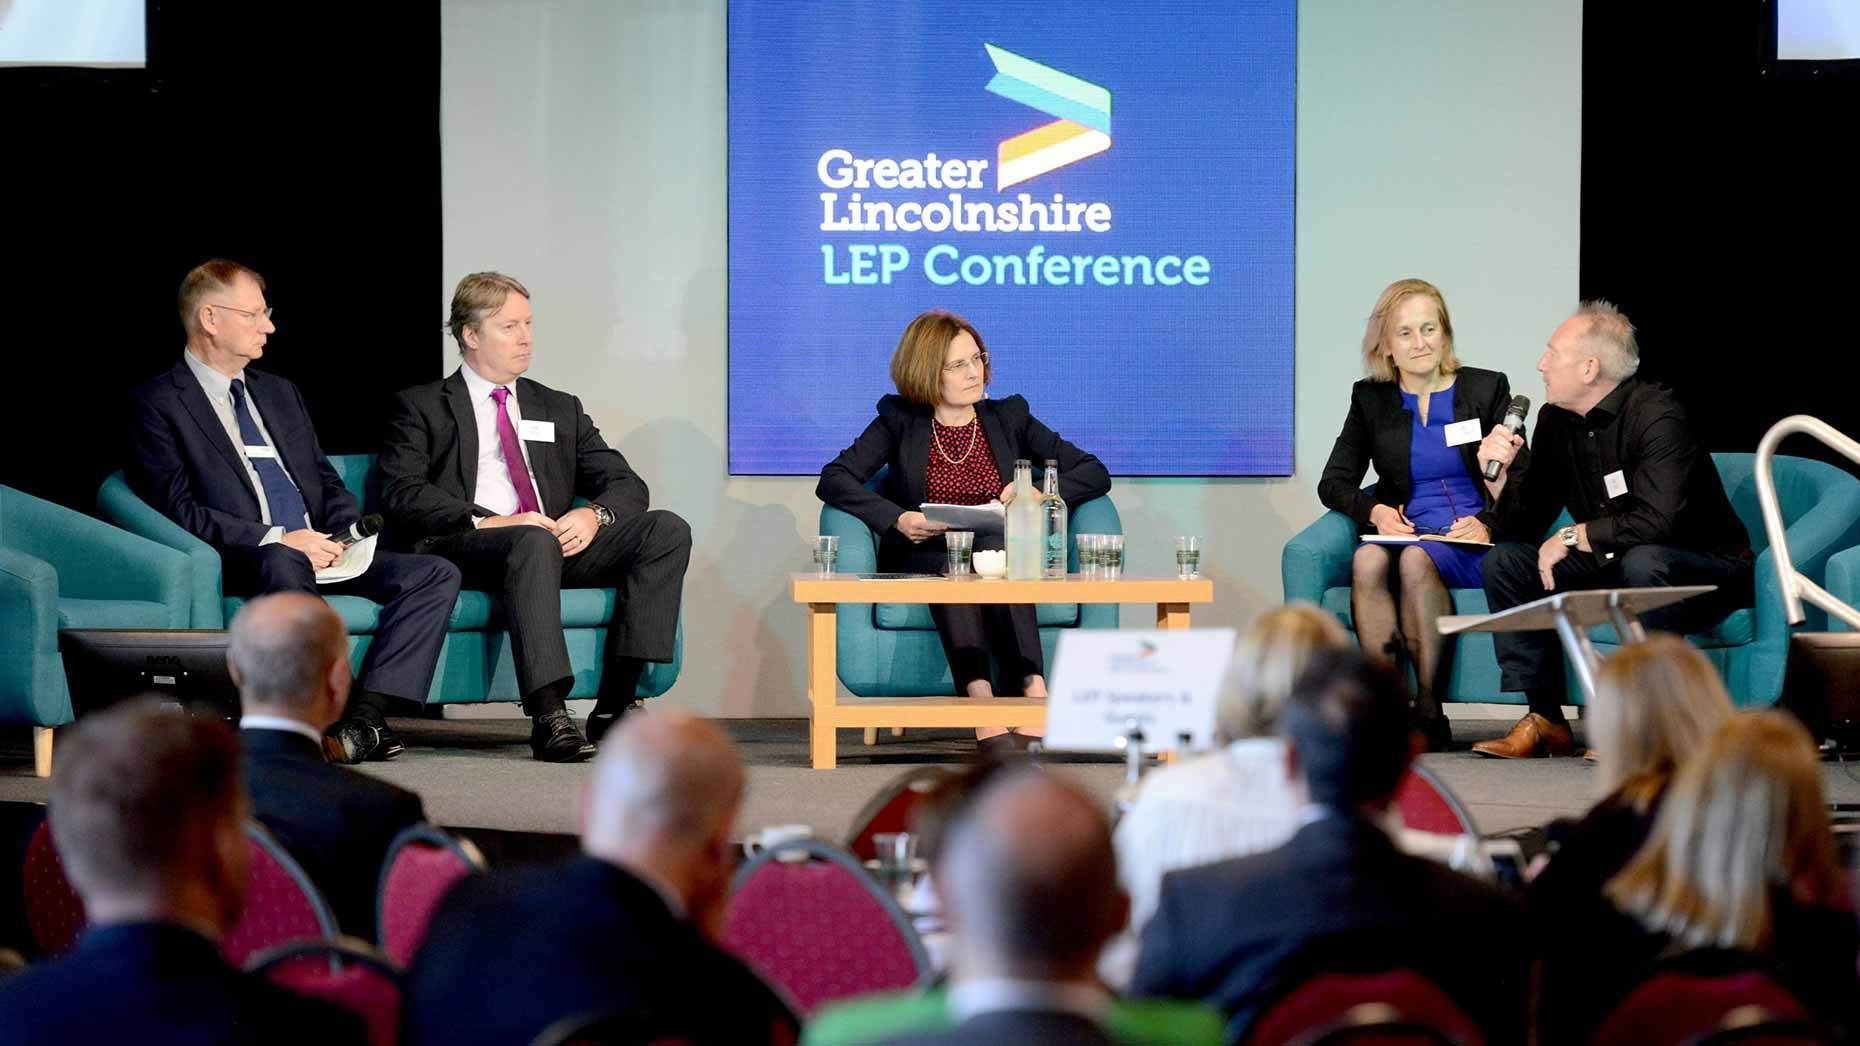 Greater Lincolnshire LEP Conference